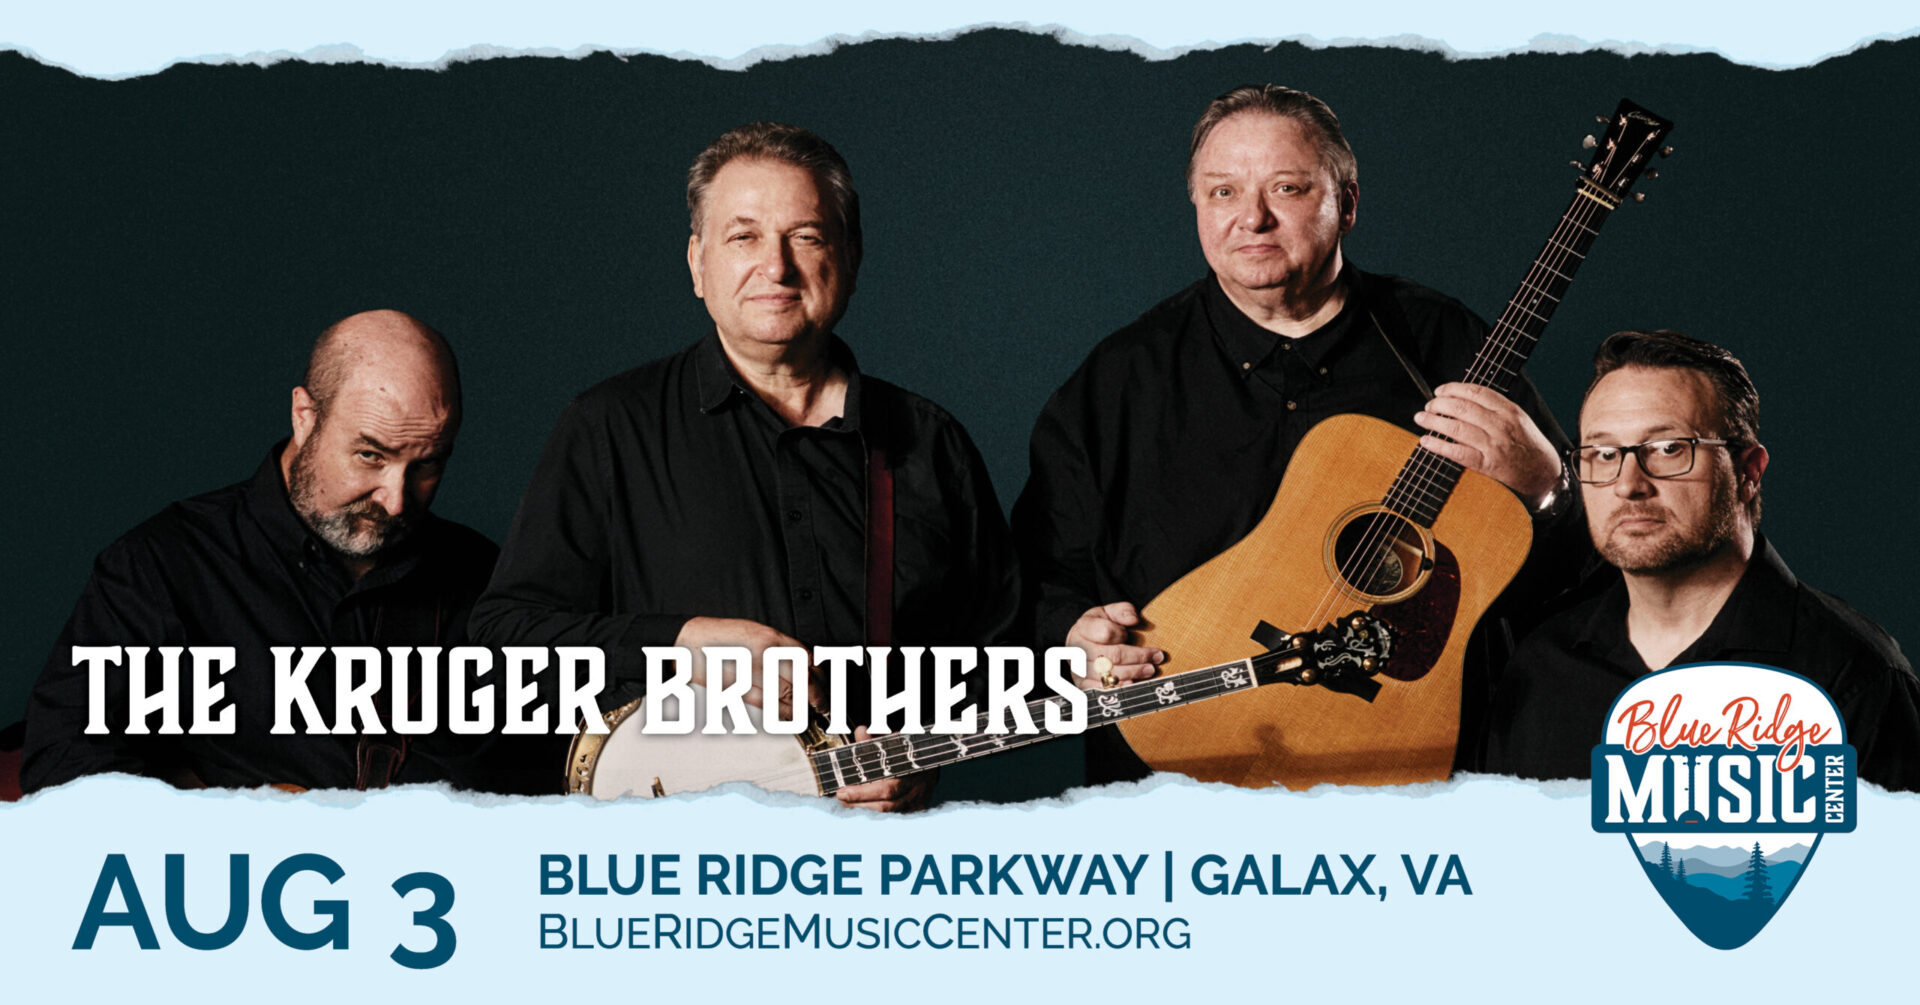 The Kruger Brothers at Blue Ridge Music Center